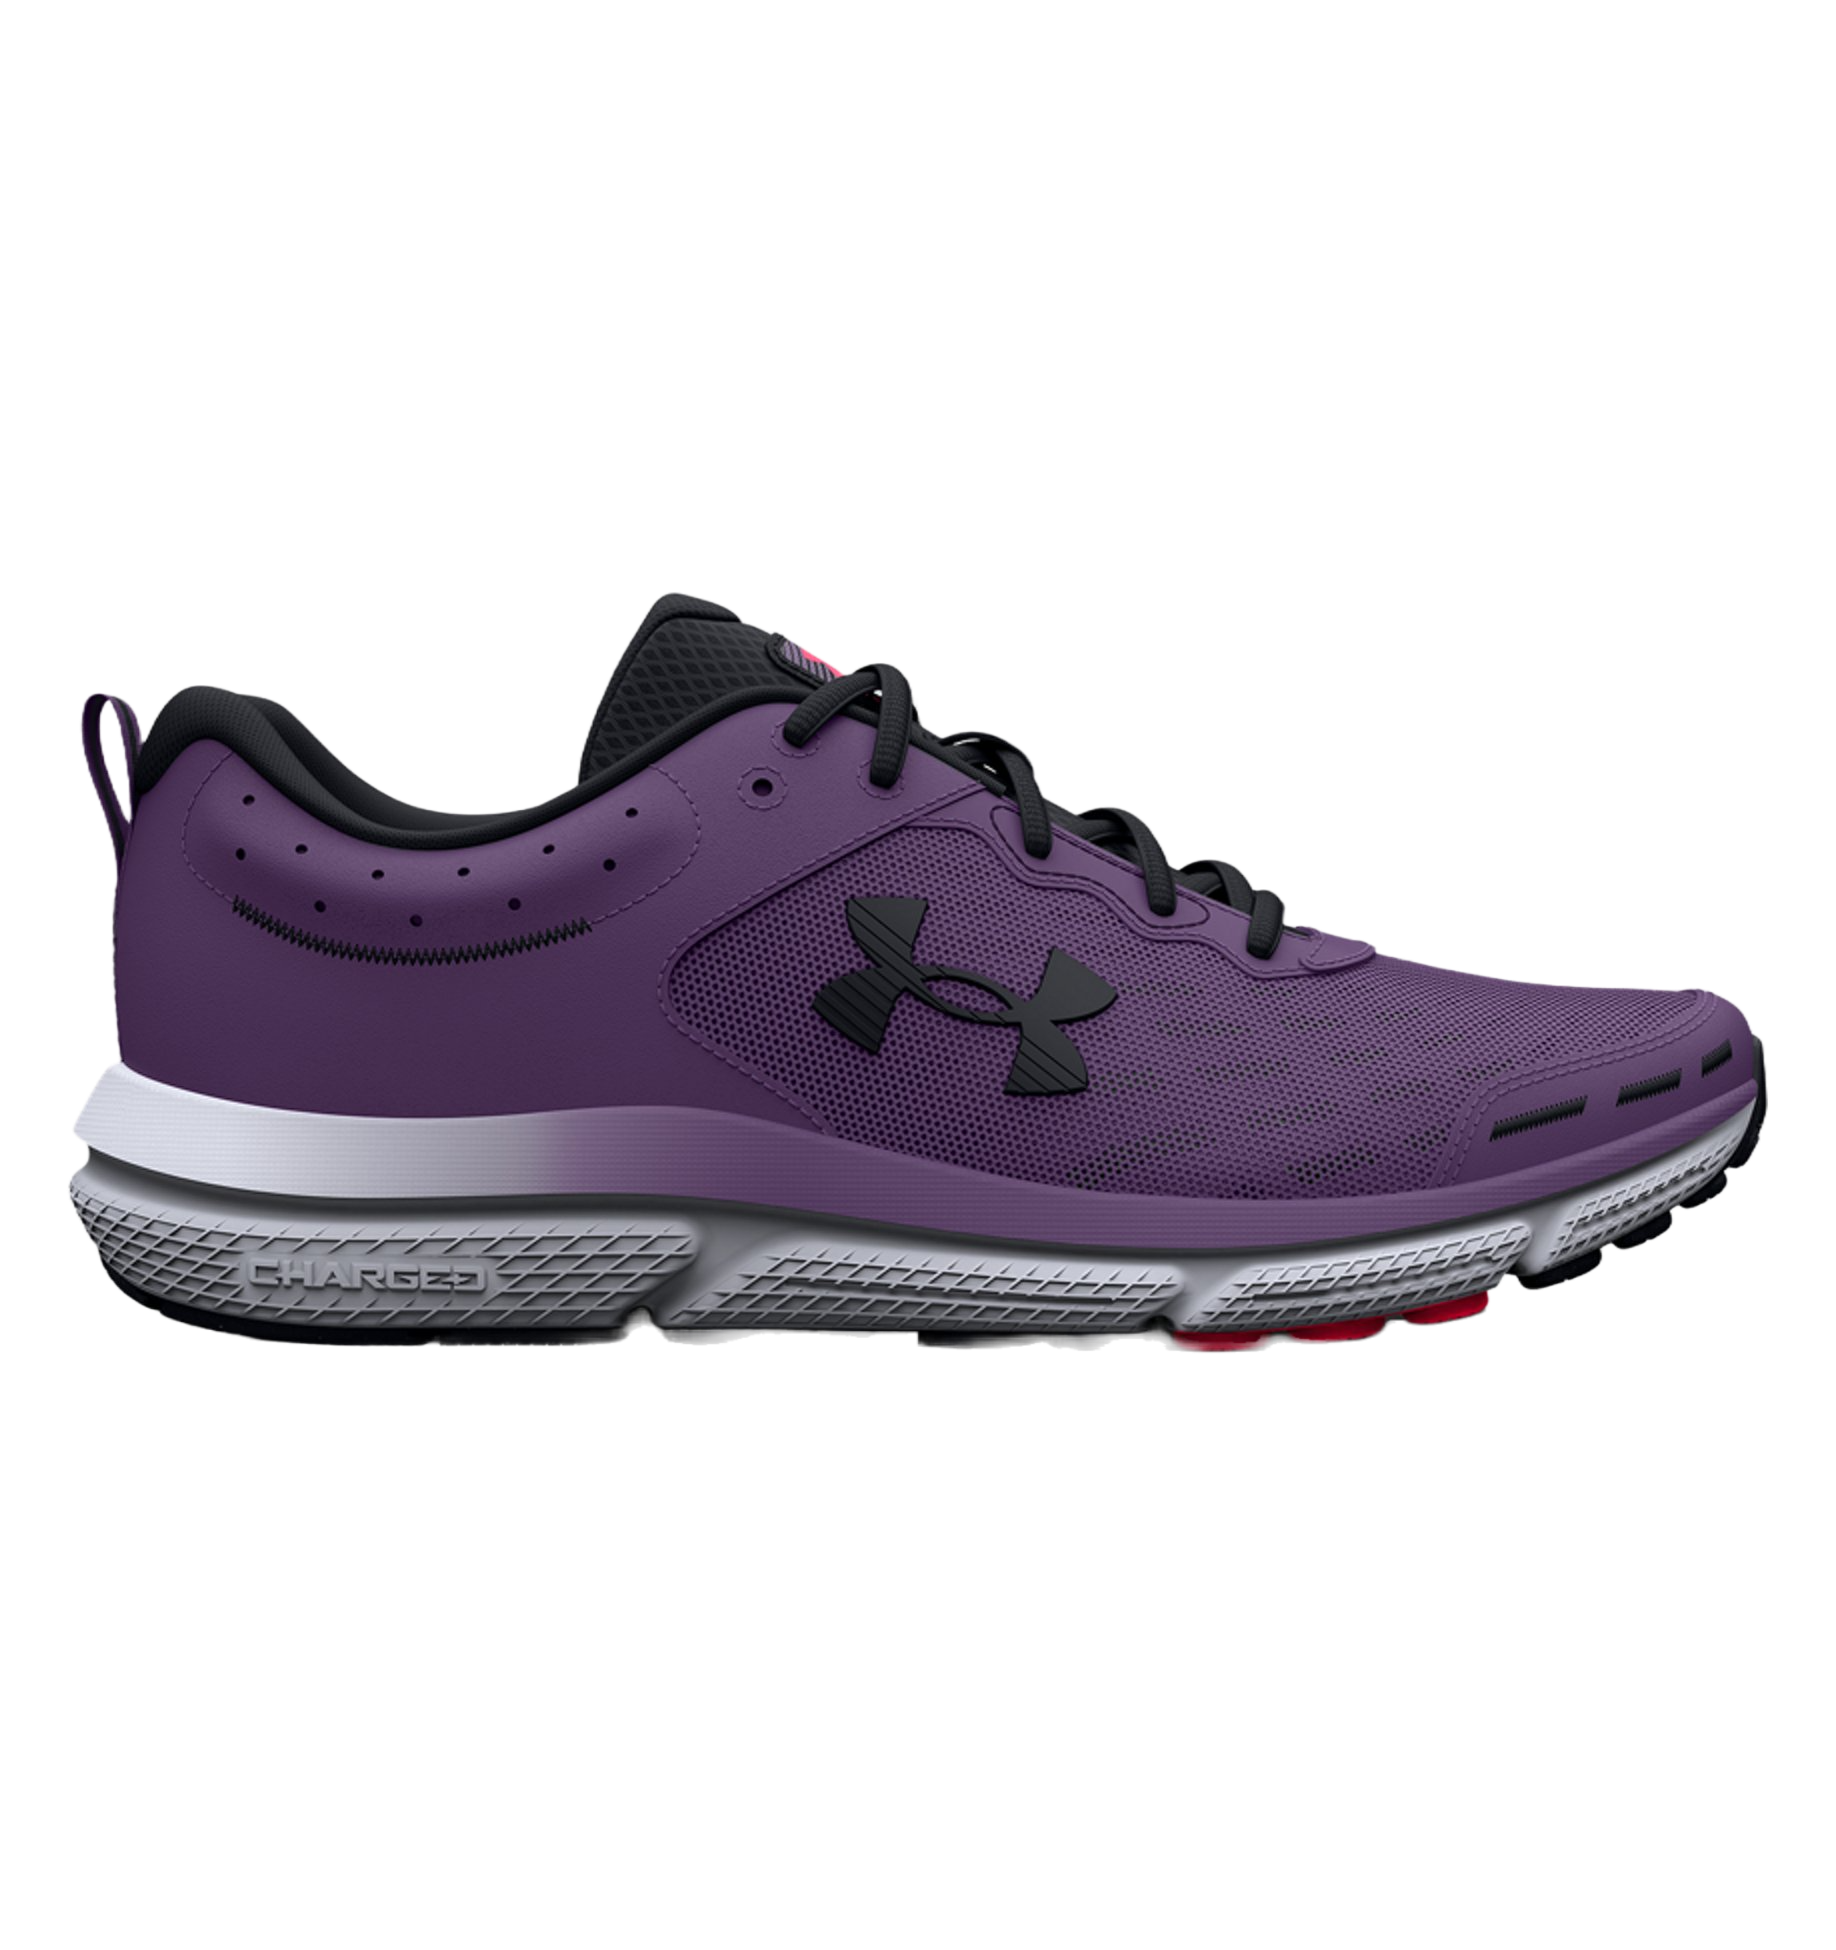 Under Armour Charged Assert 10 - Womens